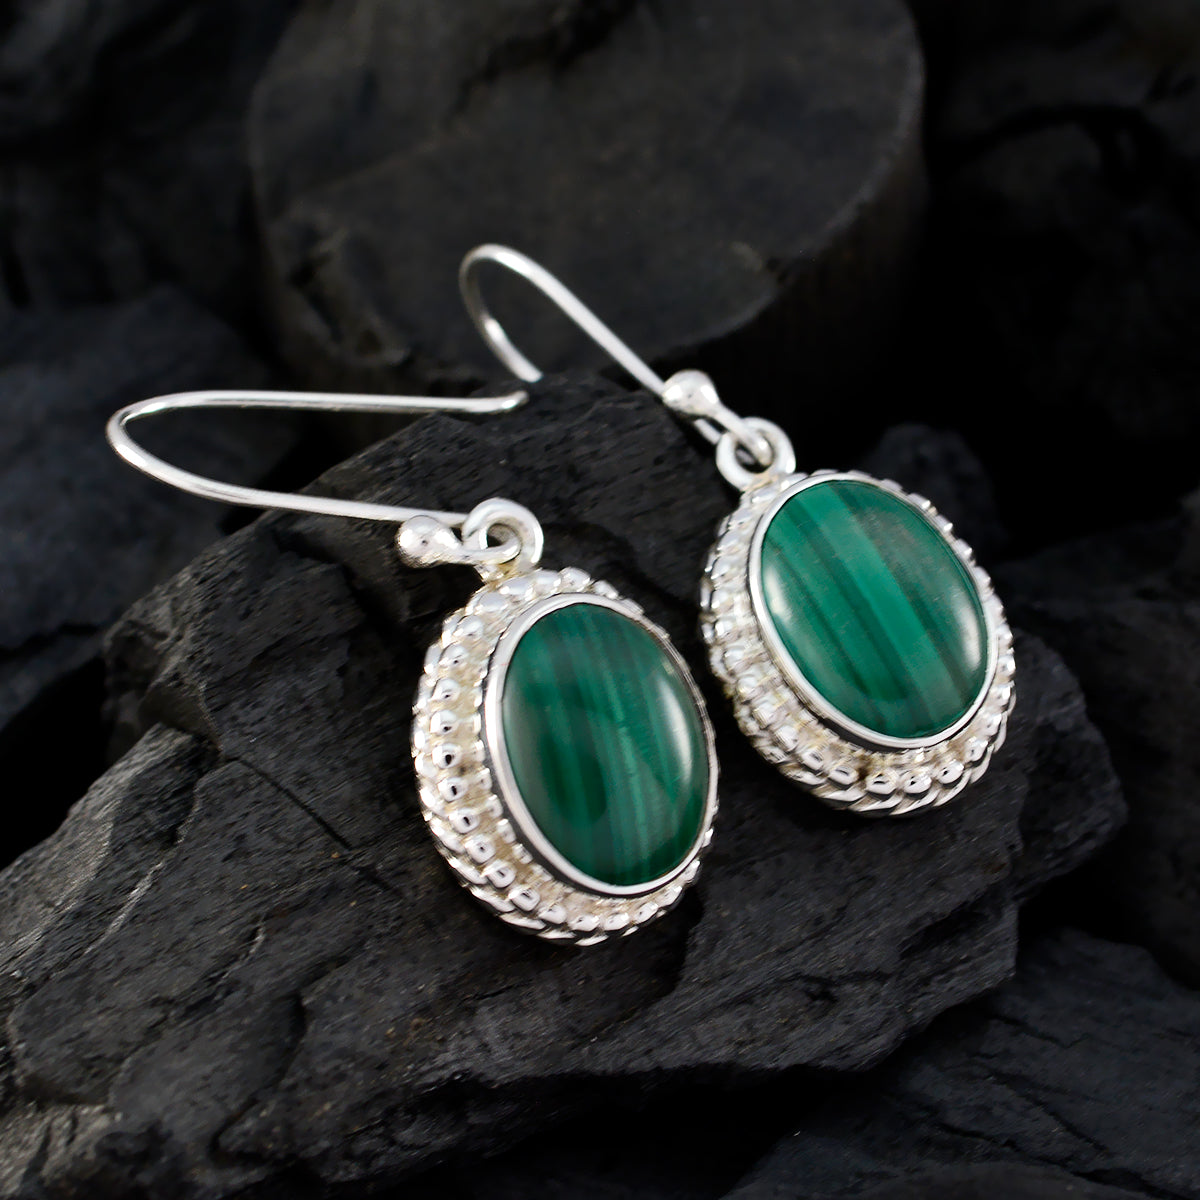 Riyo Nice Gemstone round Cabochon Green Malachatie Silver Earrings gift for labour day